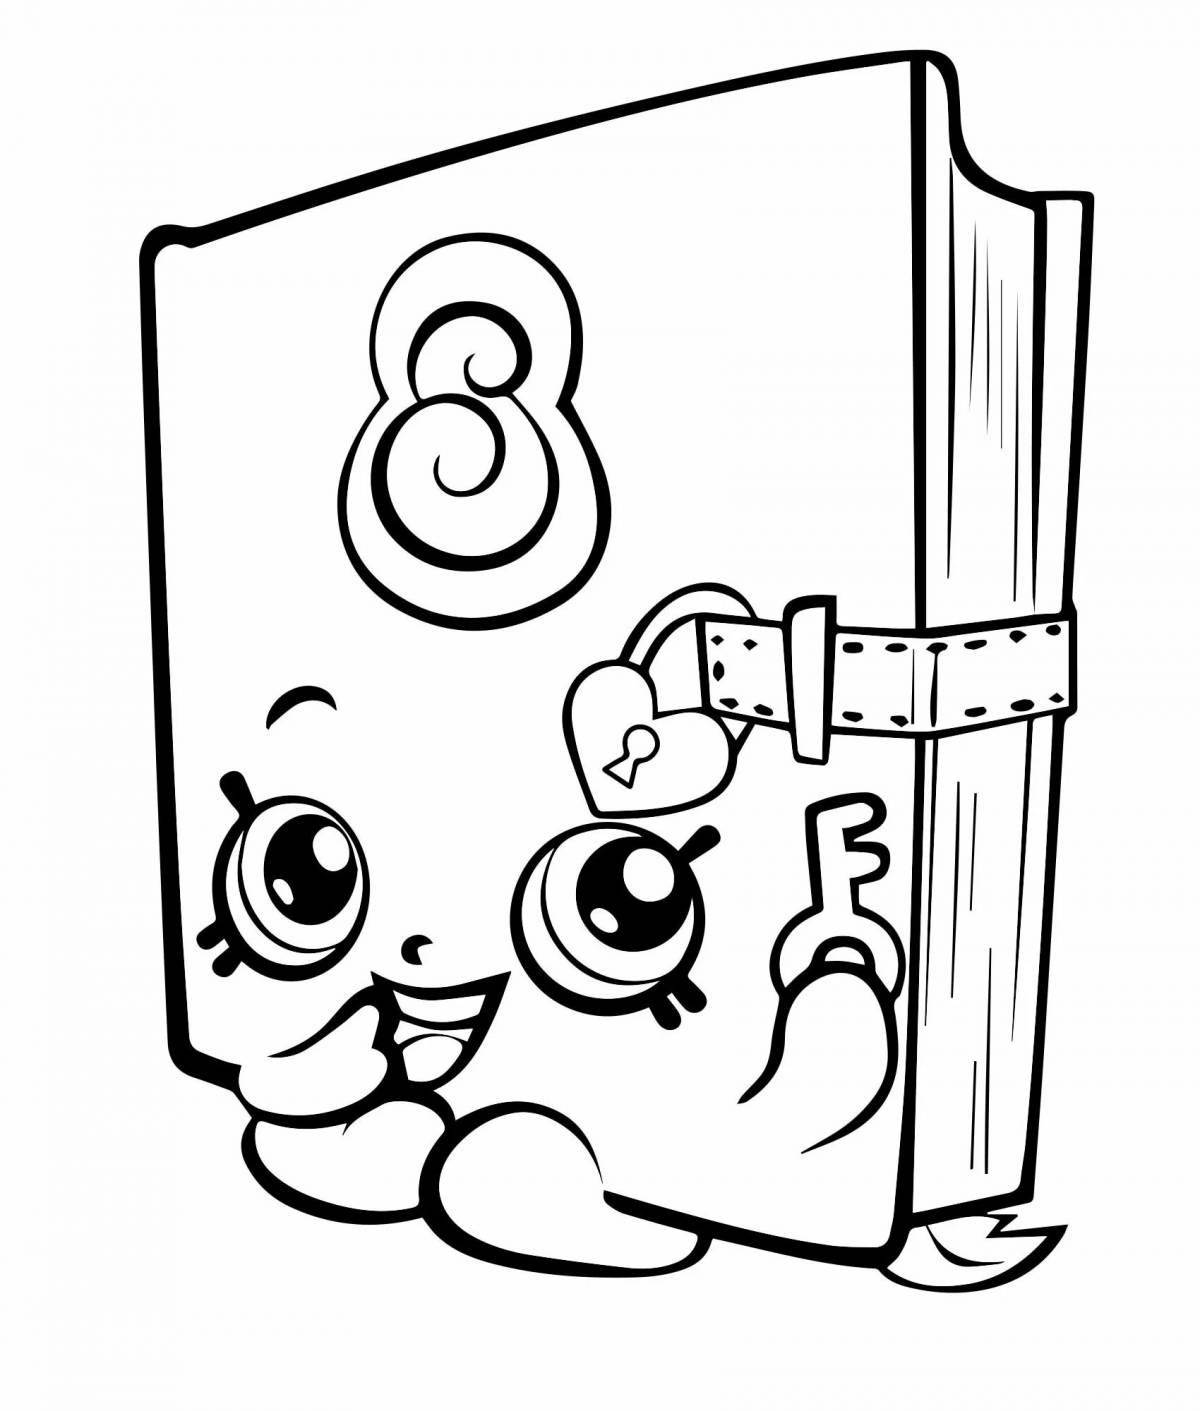 Playful shopinks coloring page